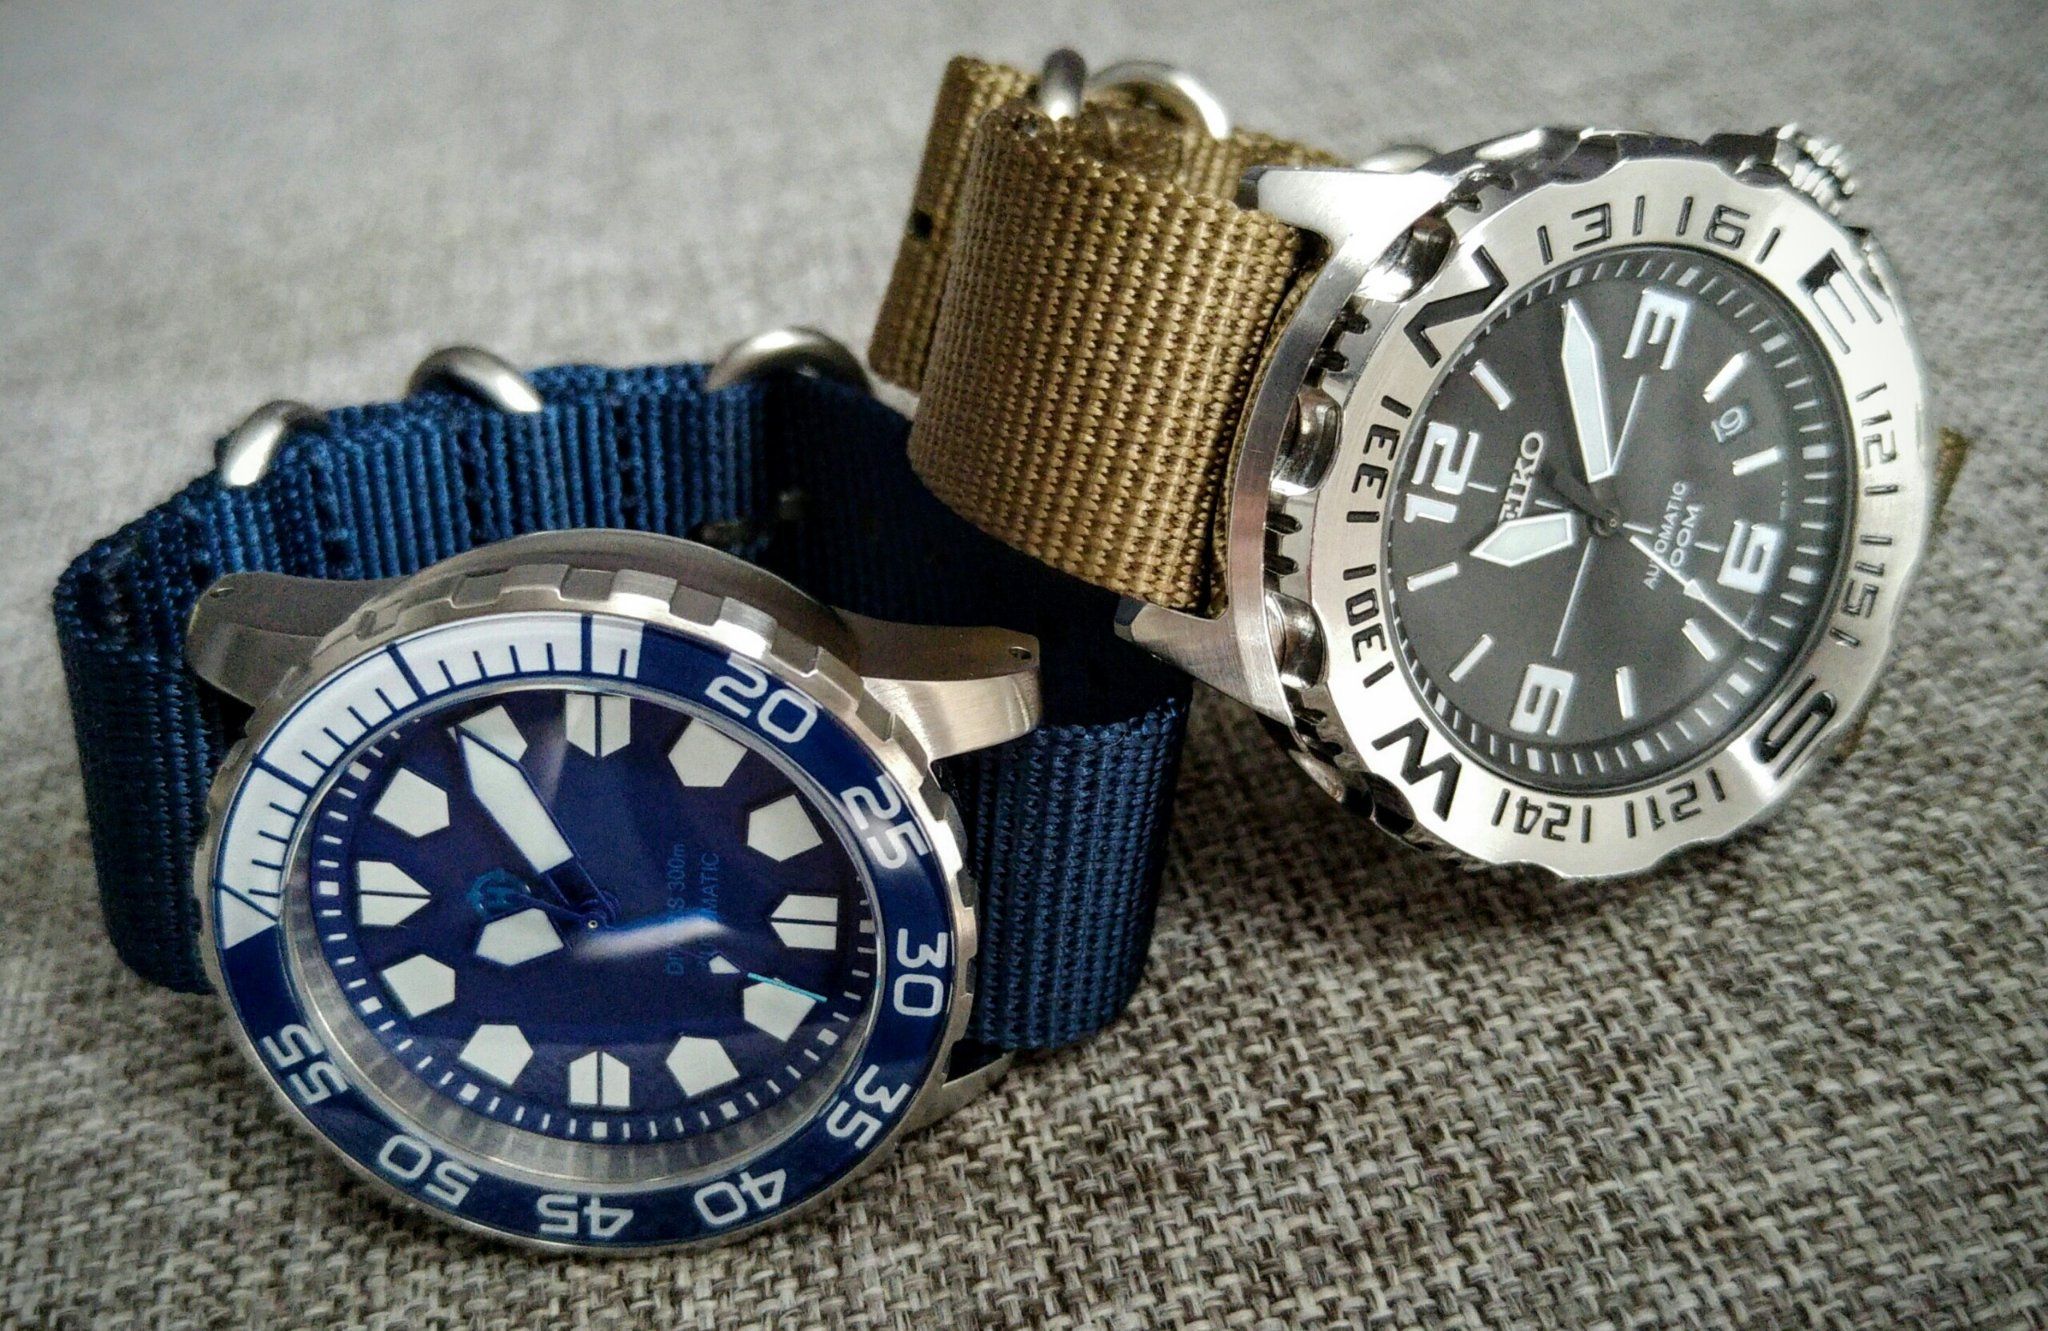 We think our ballistic nylon straps look good on these watches, don't you agree? Photo by #varioeveryday member Marcin